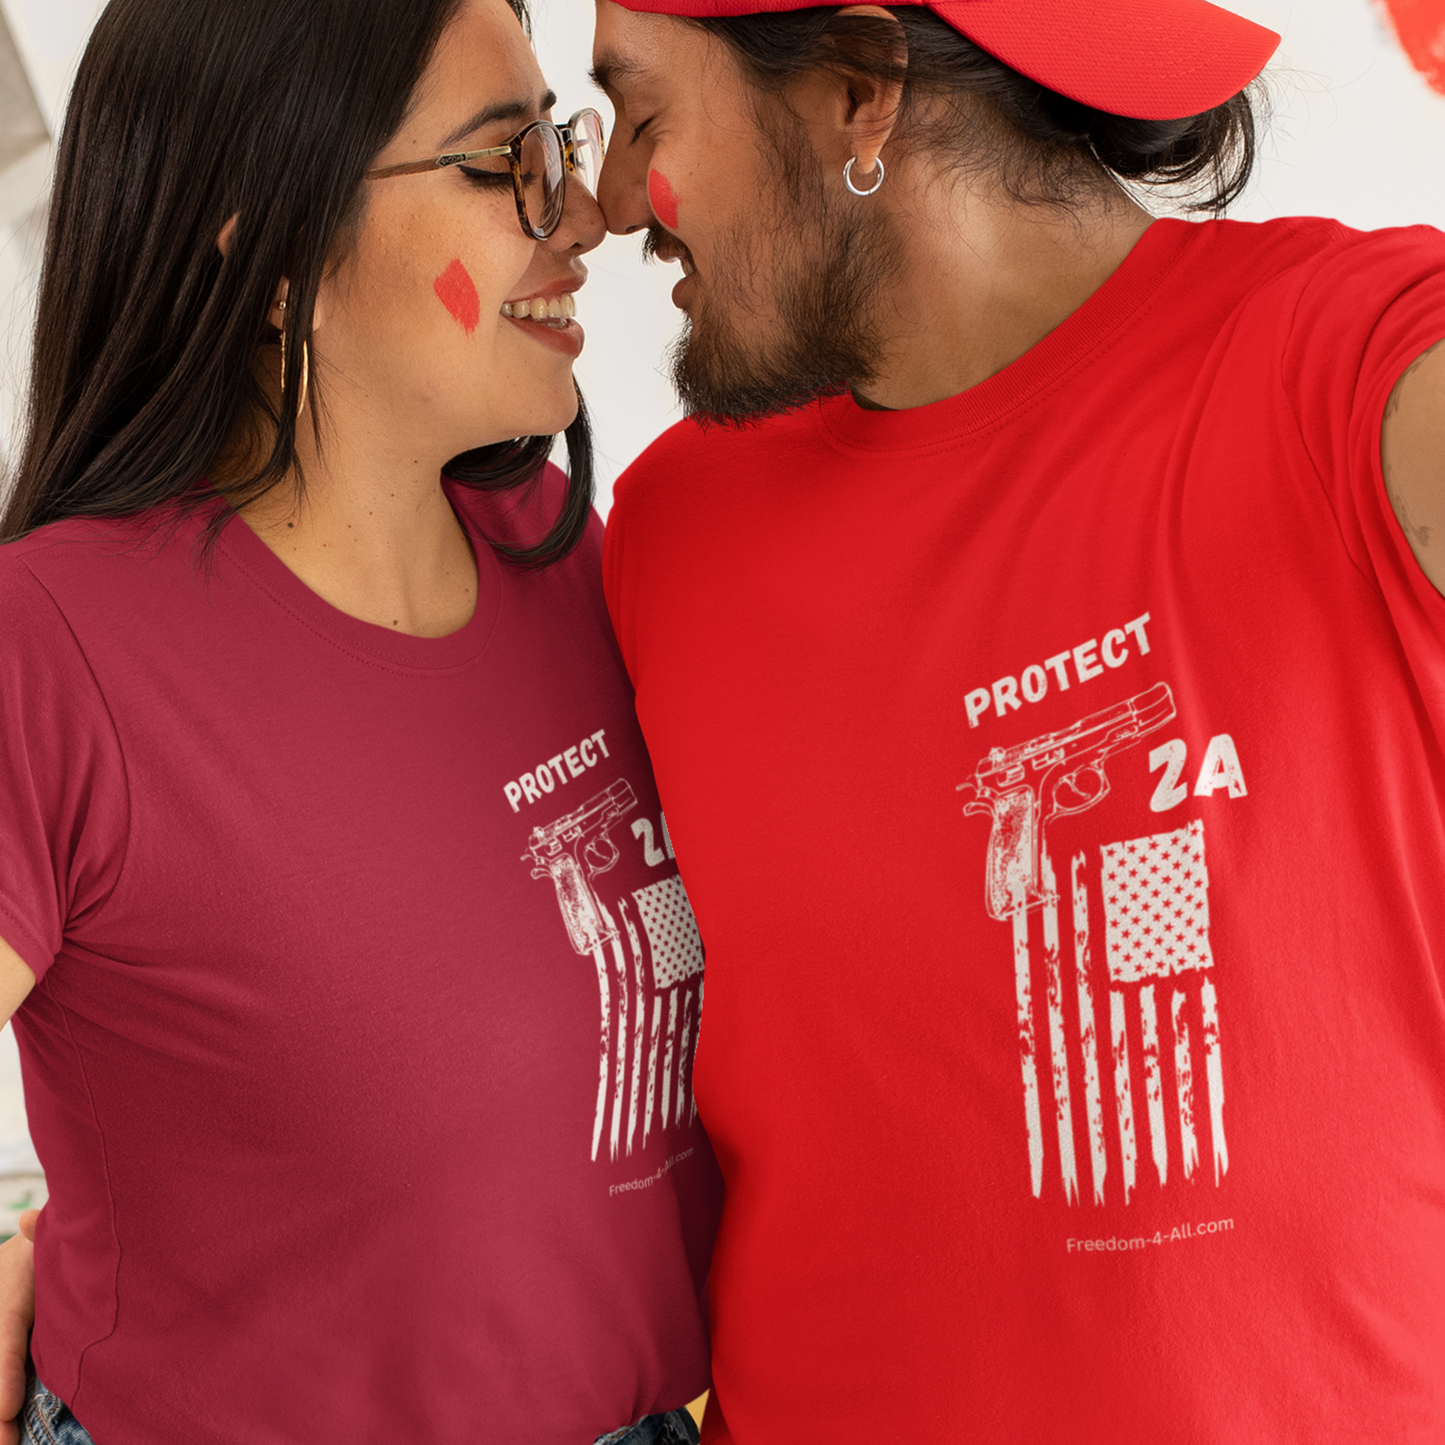 (2A-01) Protect 2A Unisex T-Shirt